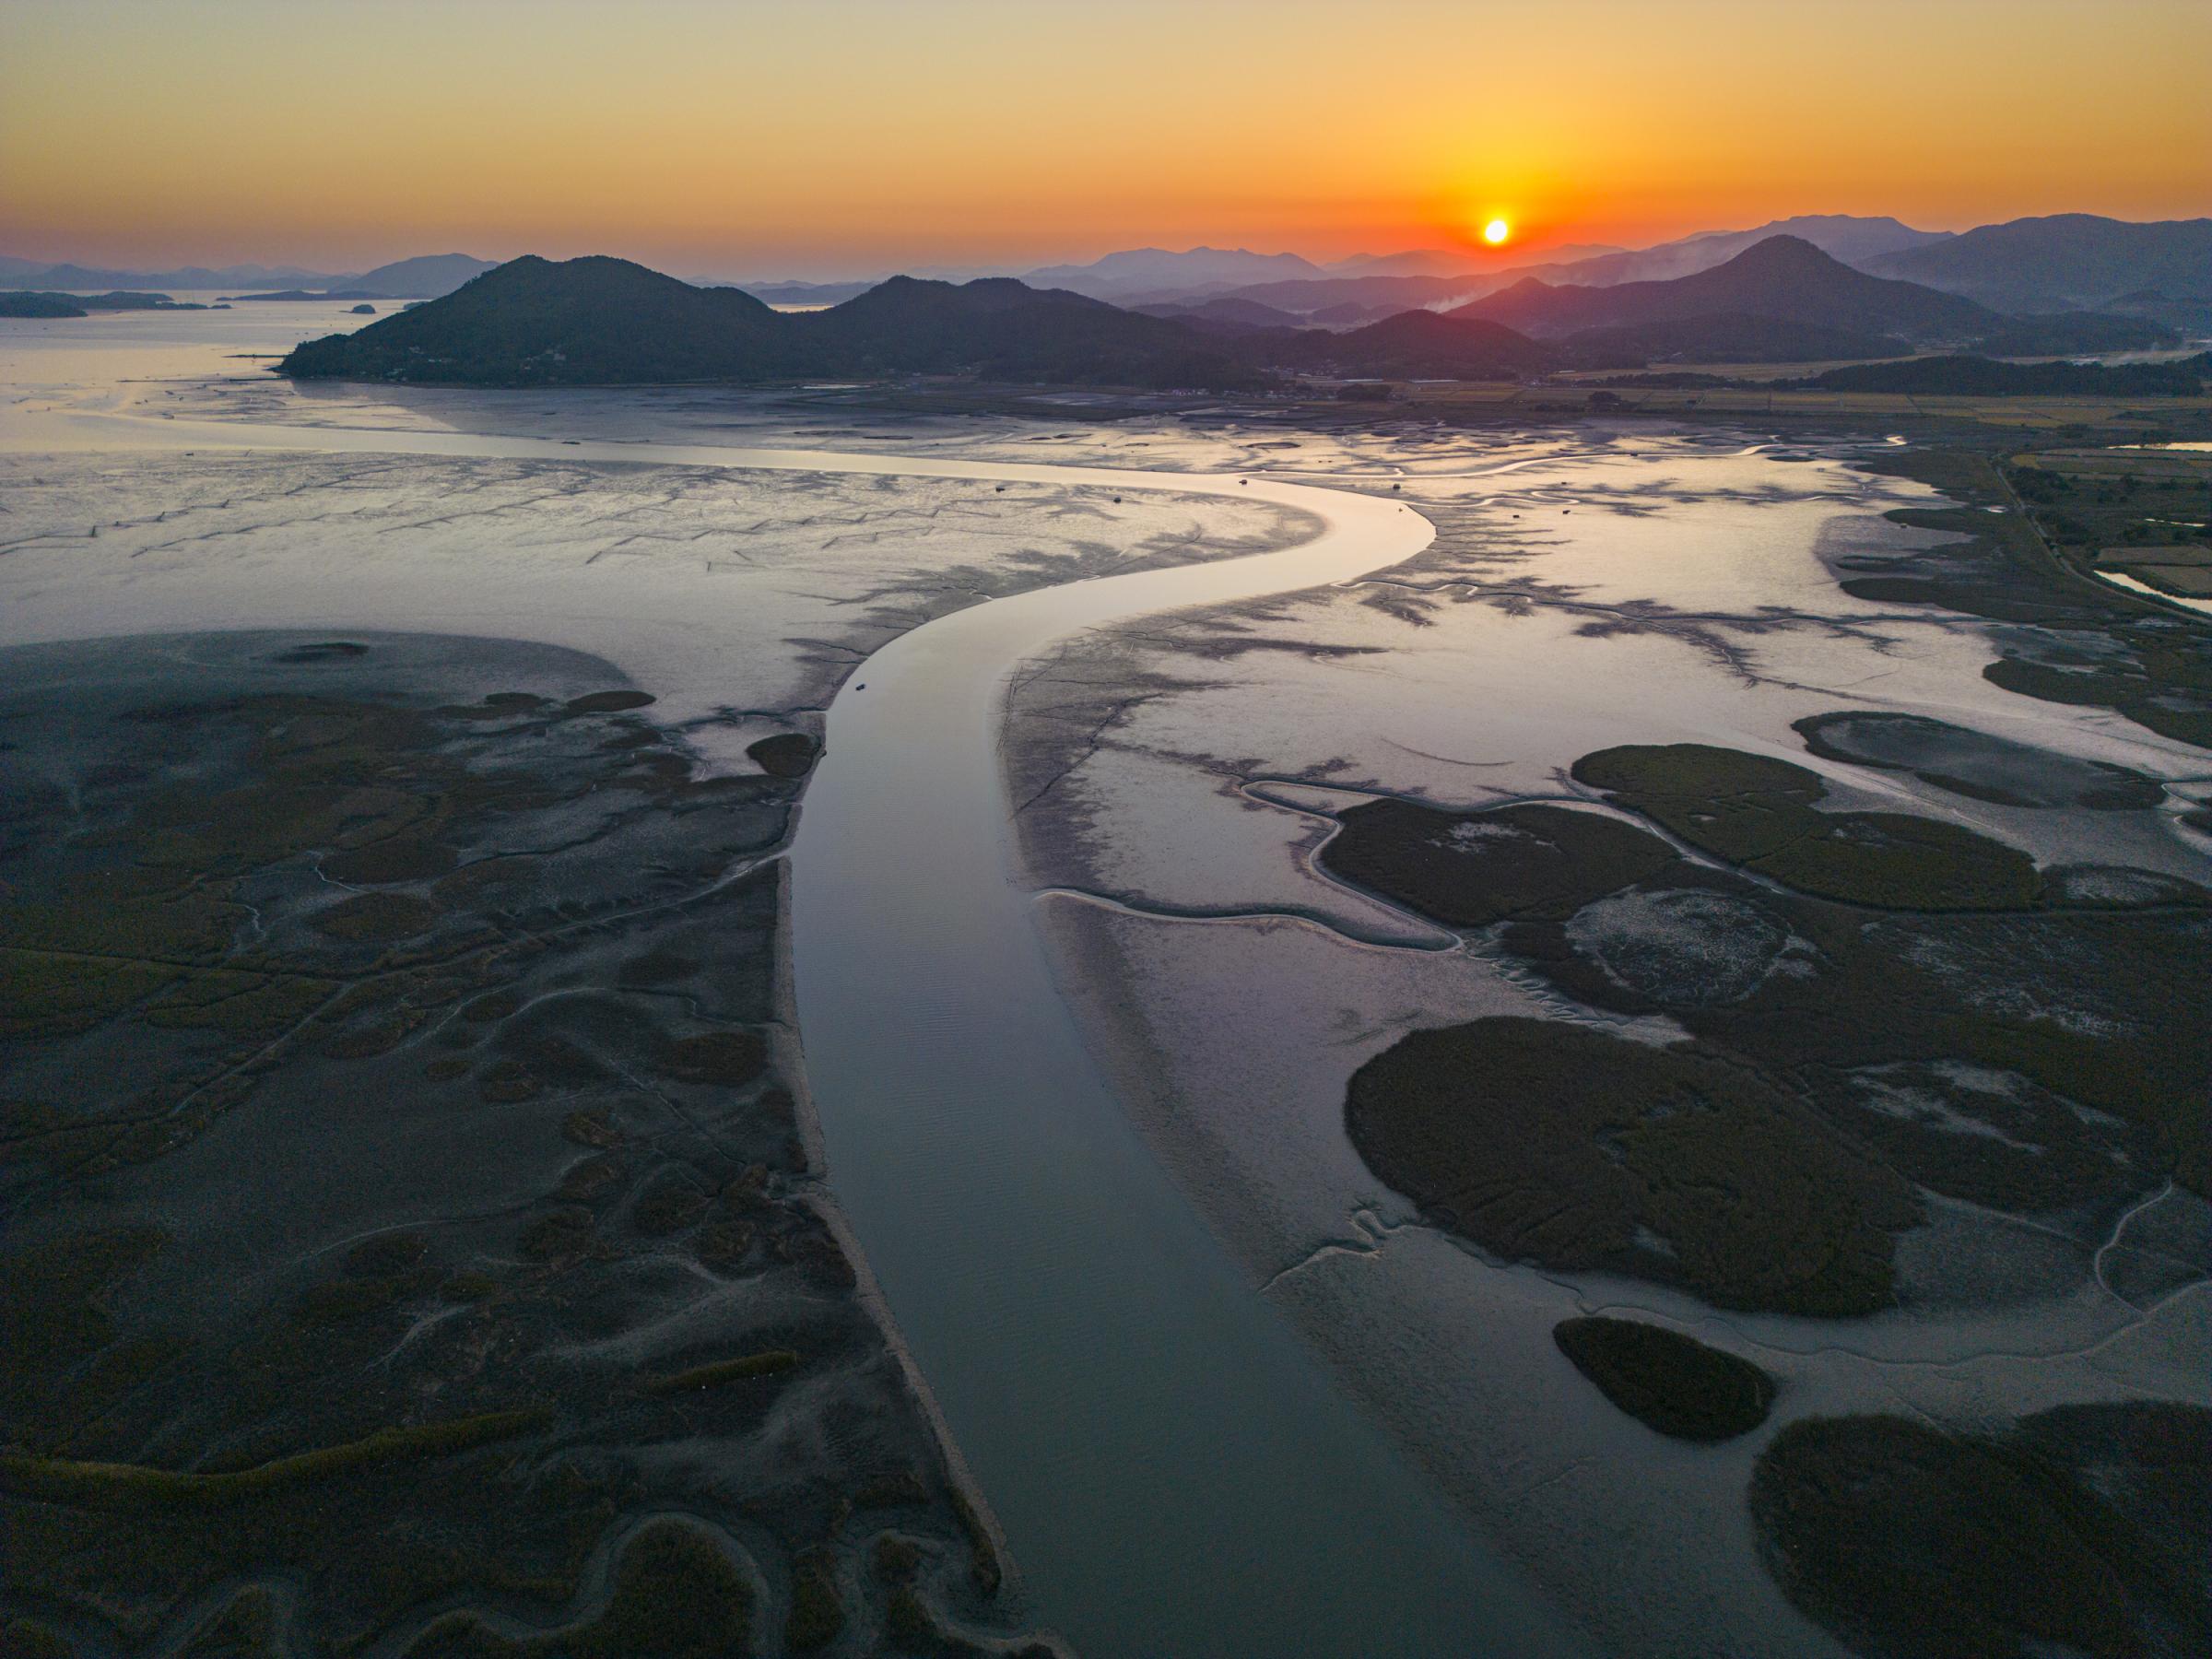 Saving South Korea's Tidal Flats - The sun sets over Suncheon Bay Wetland Reserve at low...